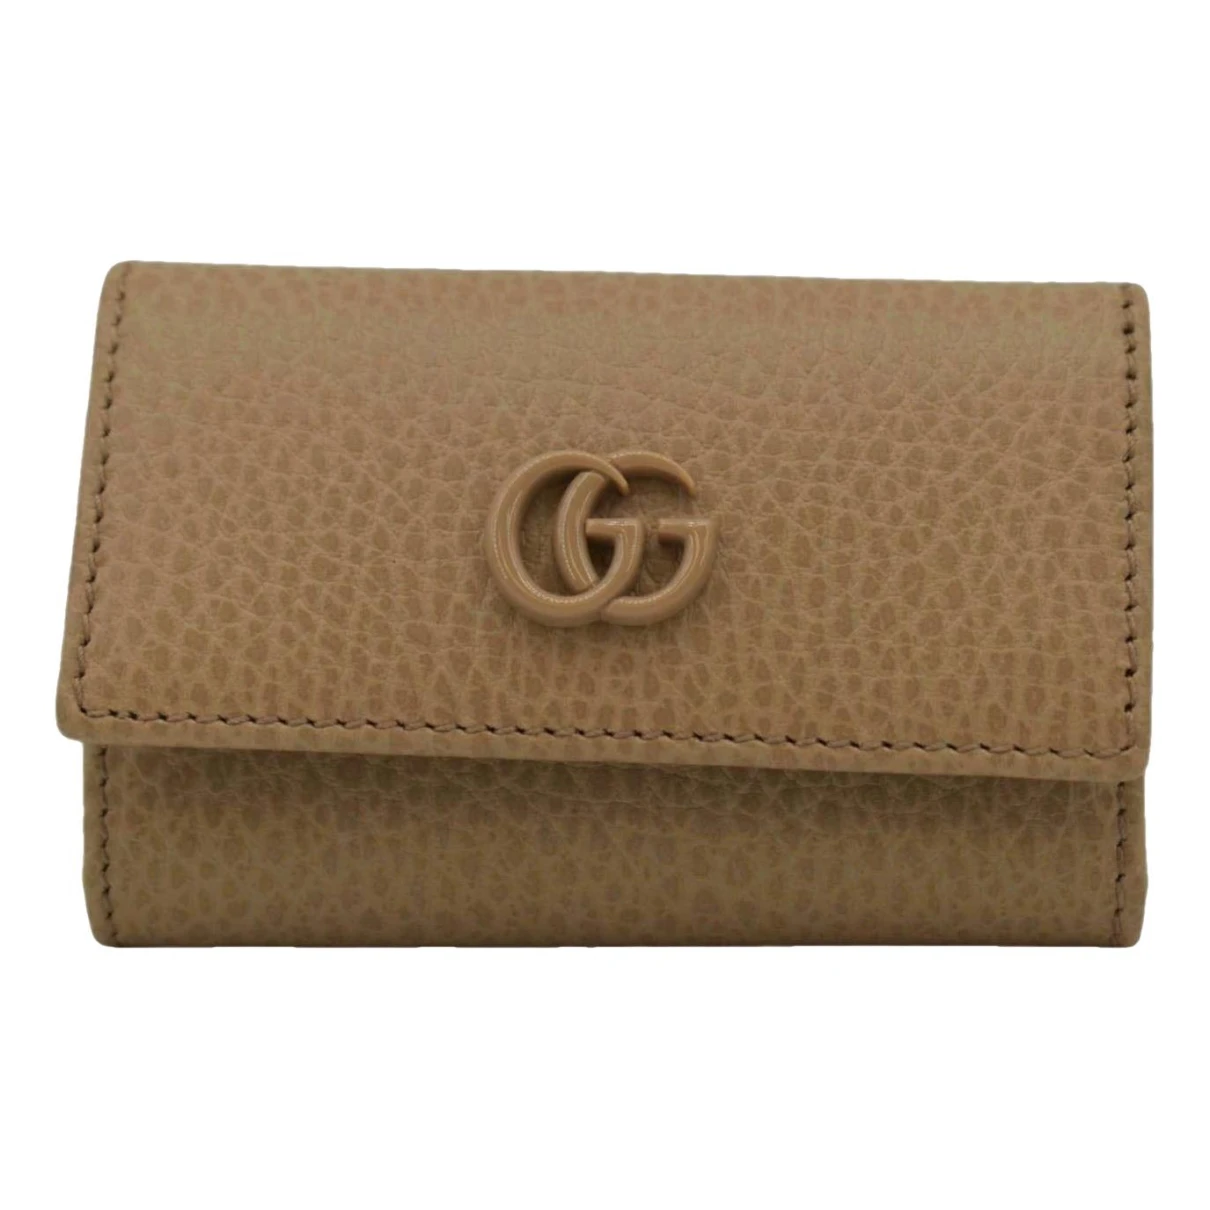 Pre-owned Gucci Marmont Leather Clutch Bag In Brown